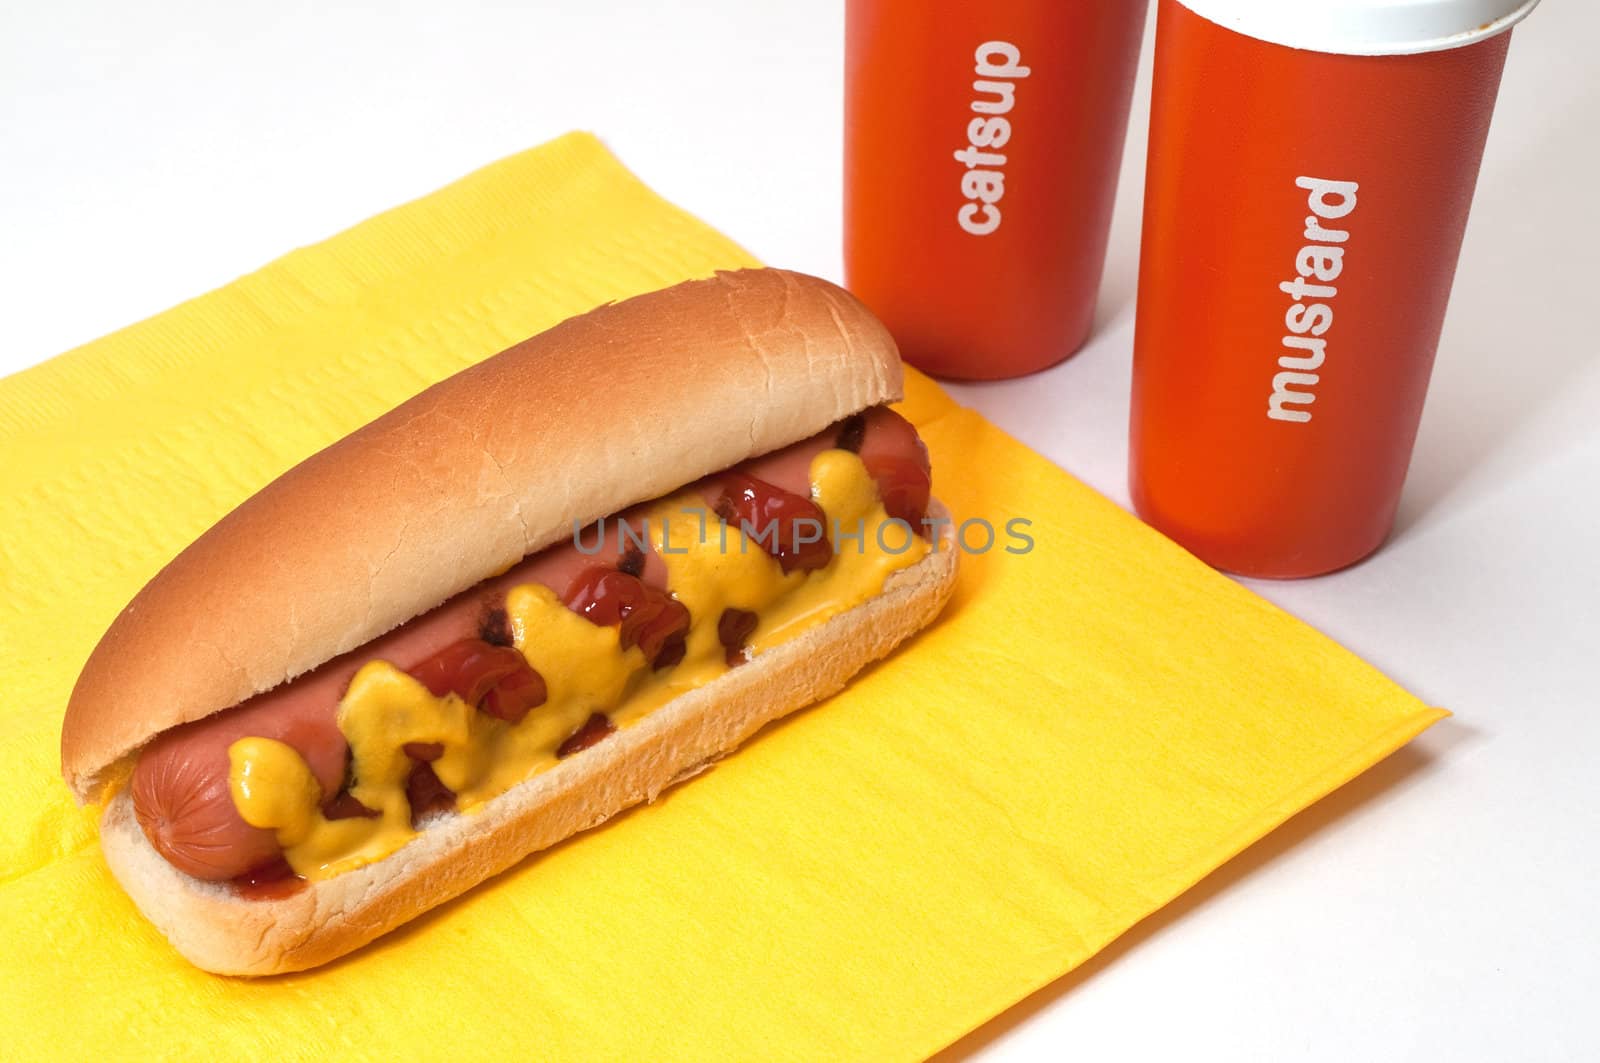 Hot Dog with Ketchup and Mustard by dehooks